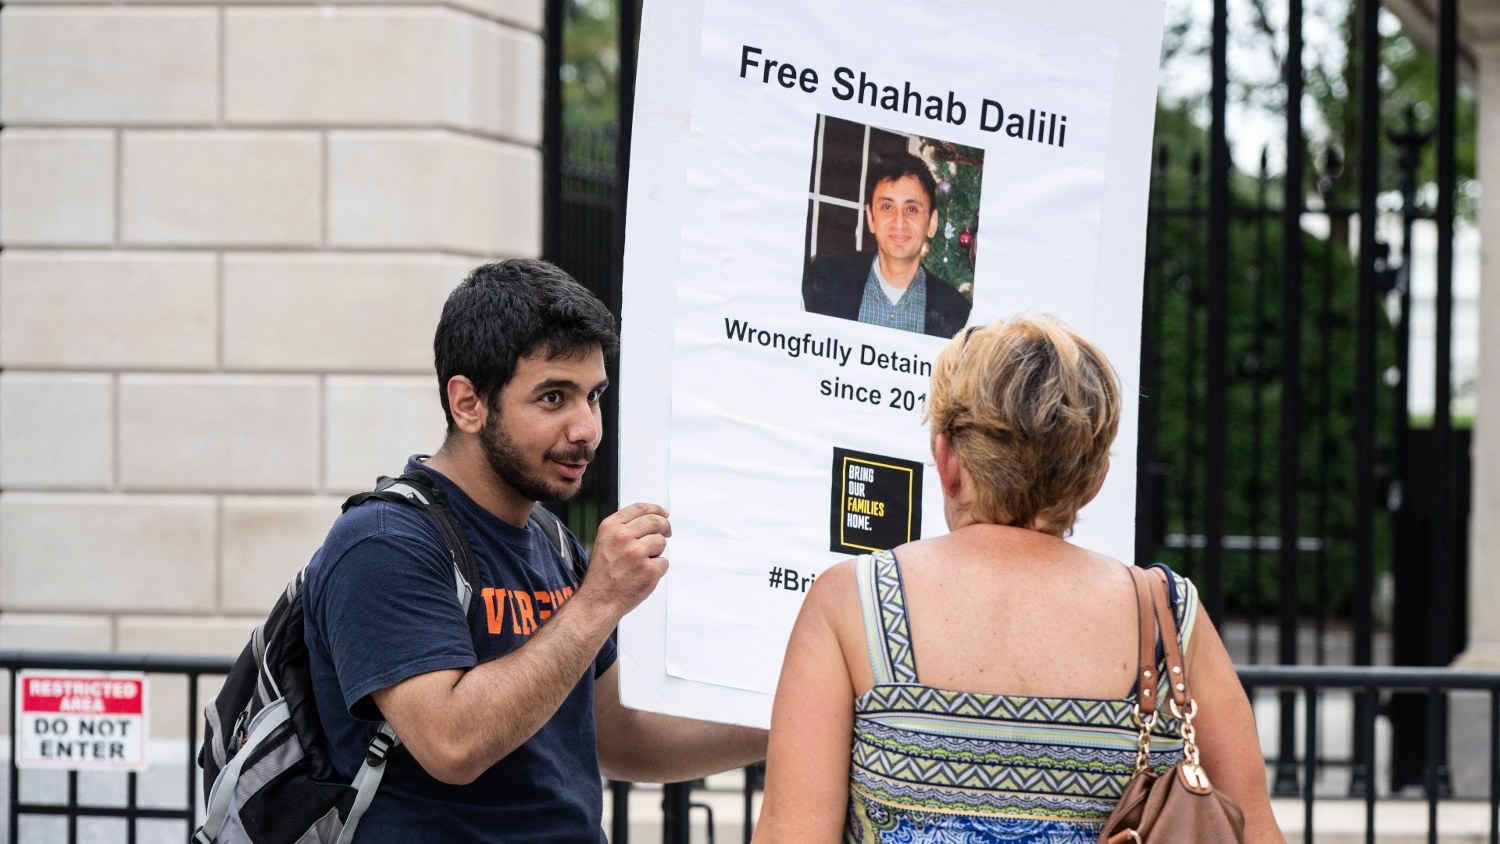 Darian Dalili holds up a sign outside the White House in Washington, DC on 14 August 2023, as he calls for the release of his father, Shahab Dalili, a US permanent resident jailed in Iran.